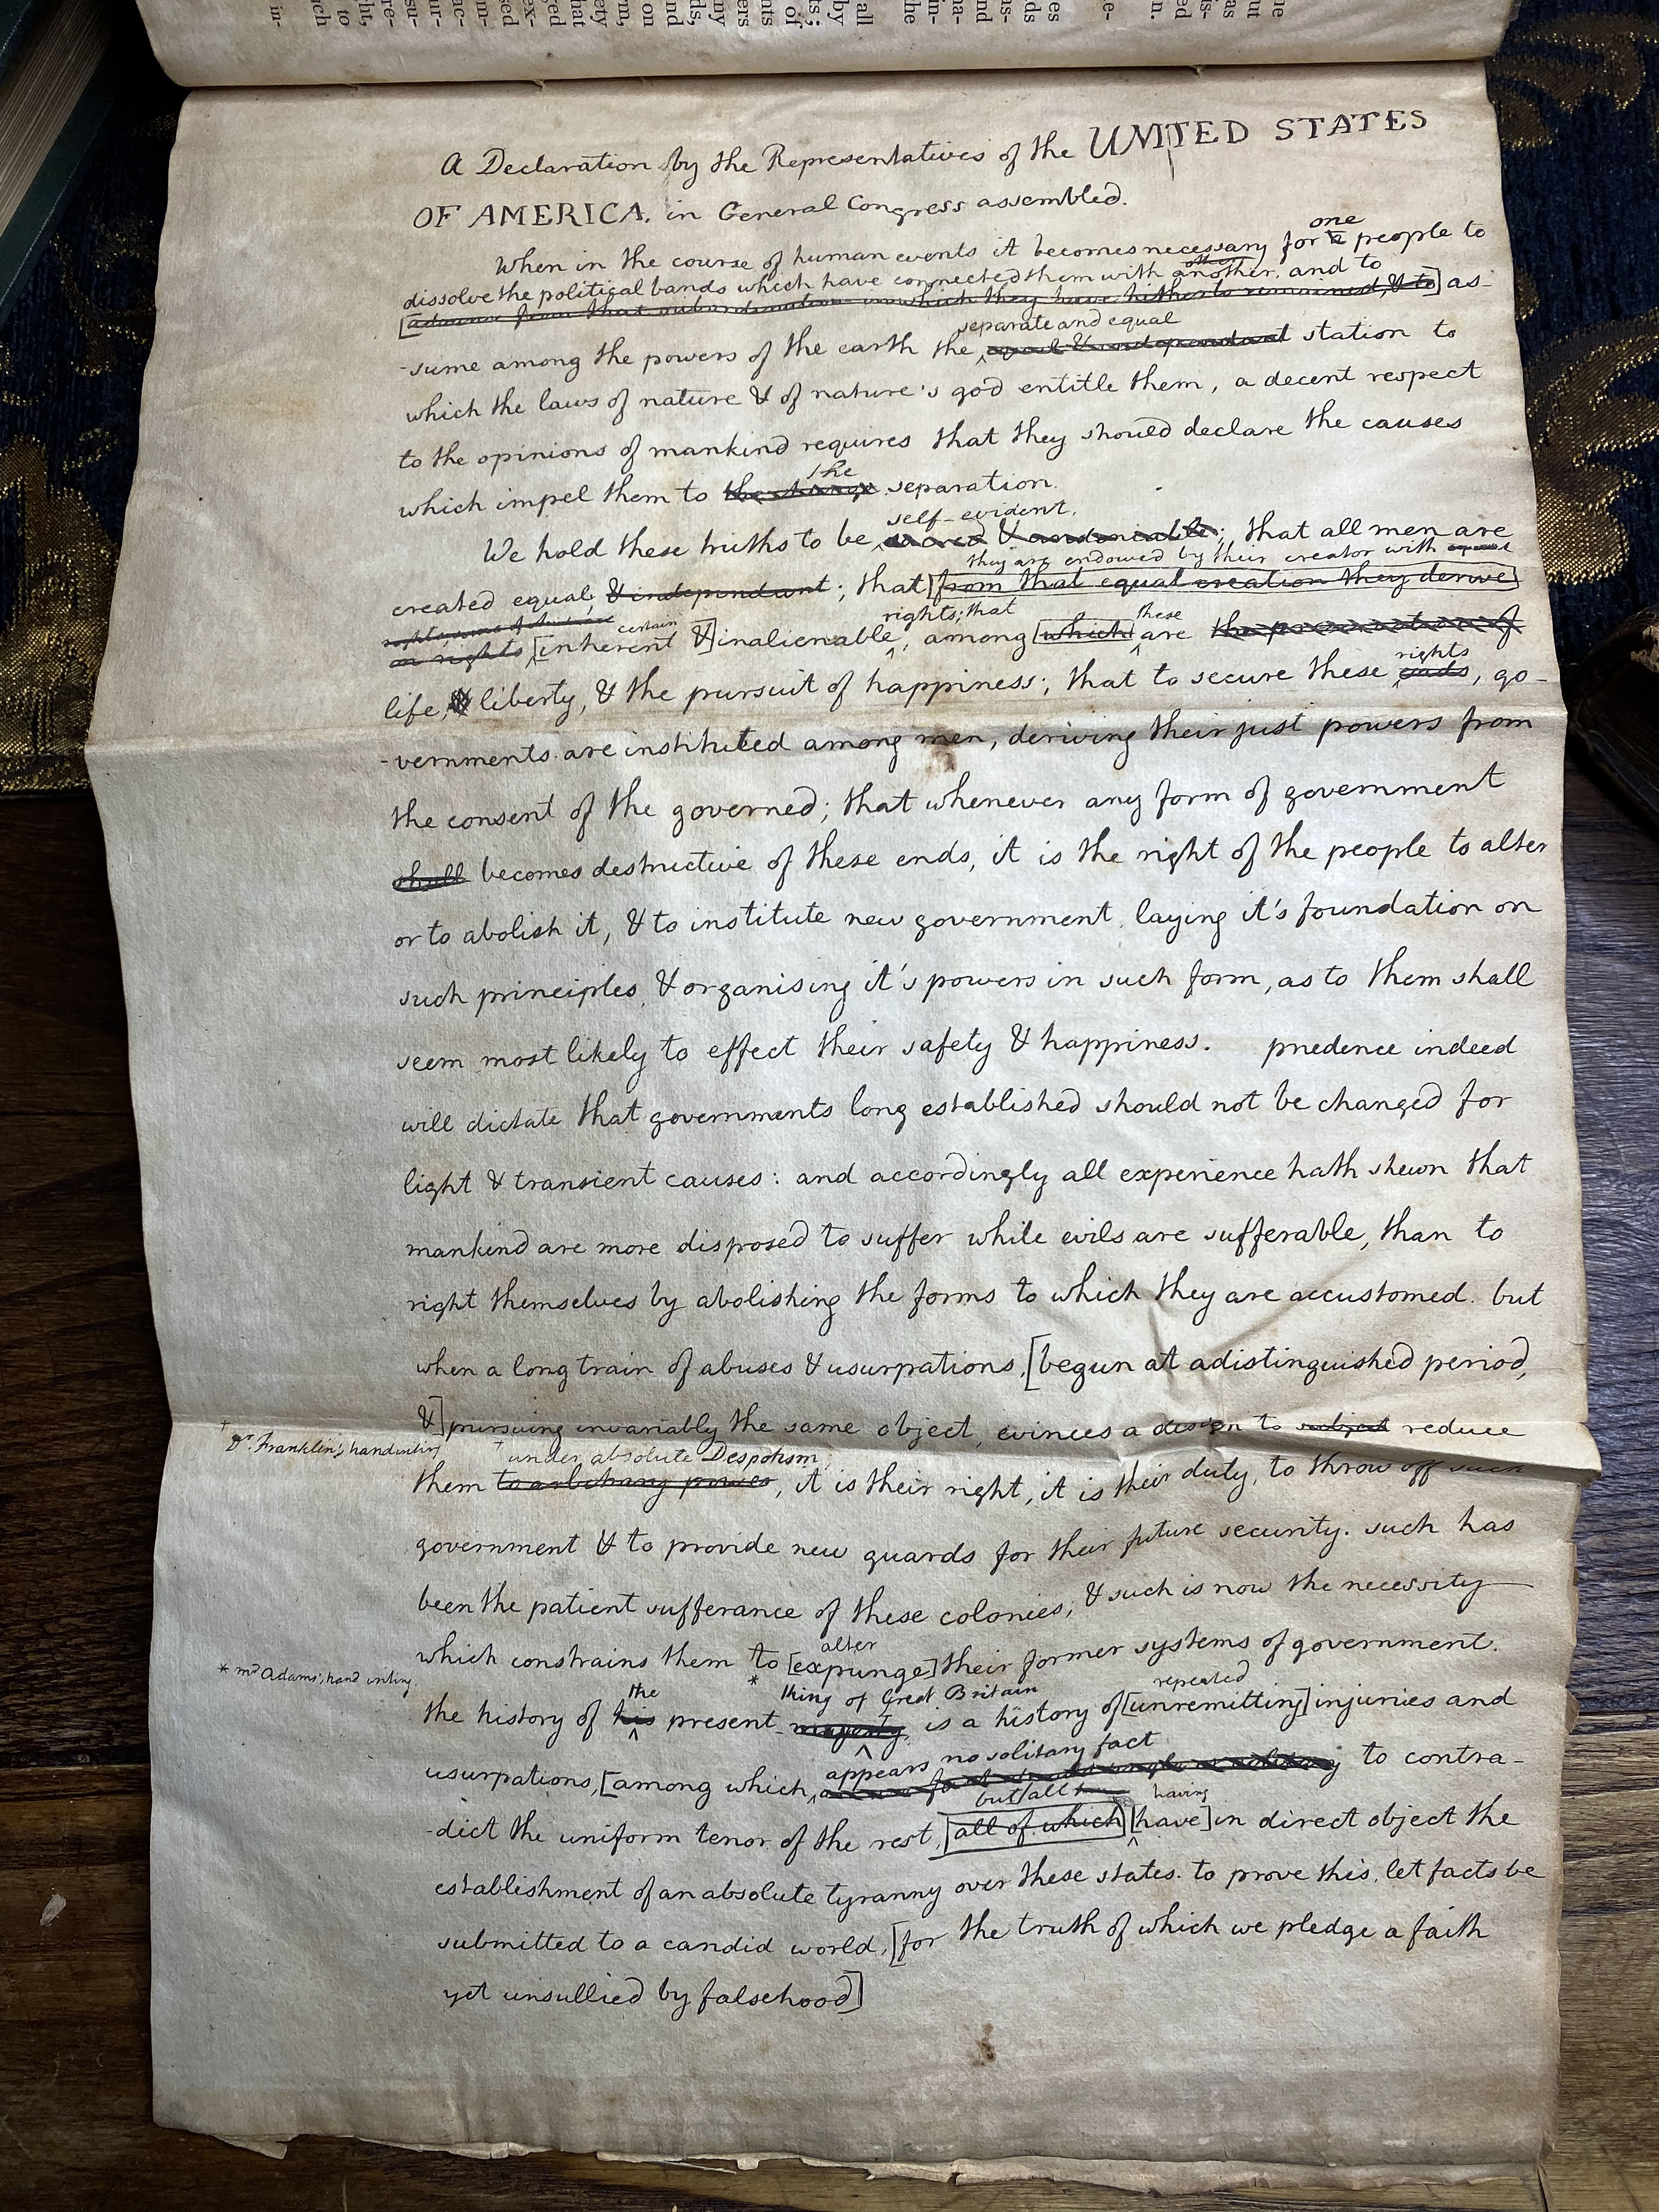 page 1 of the original Declaration of Independence with edits by Thomas Jefferson